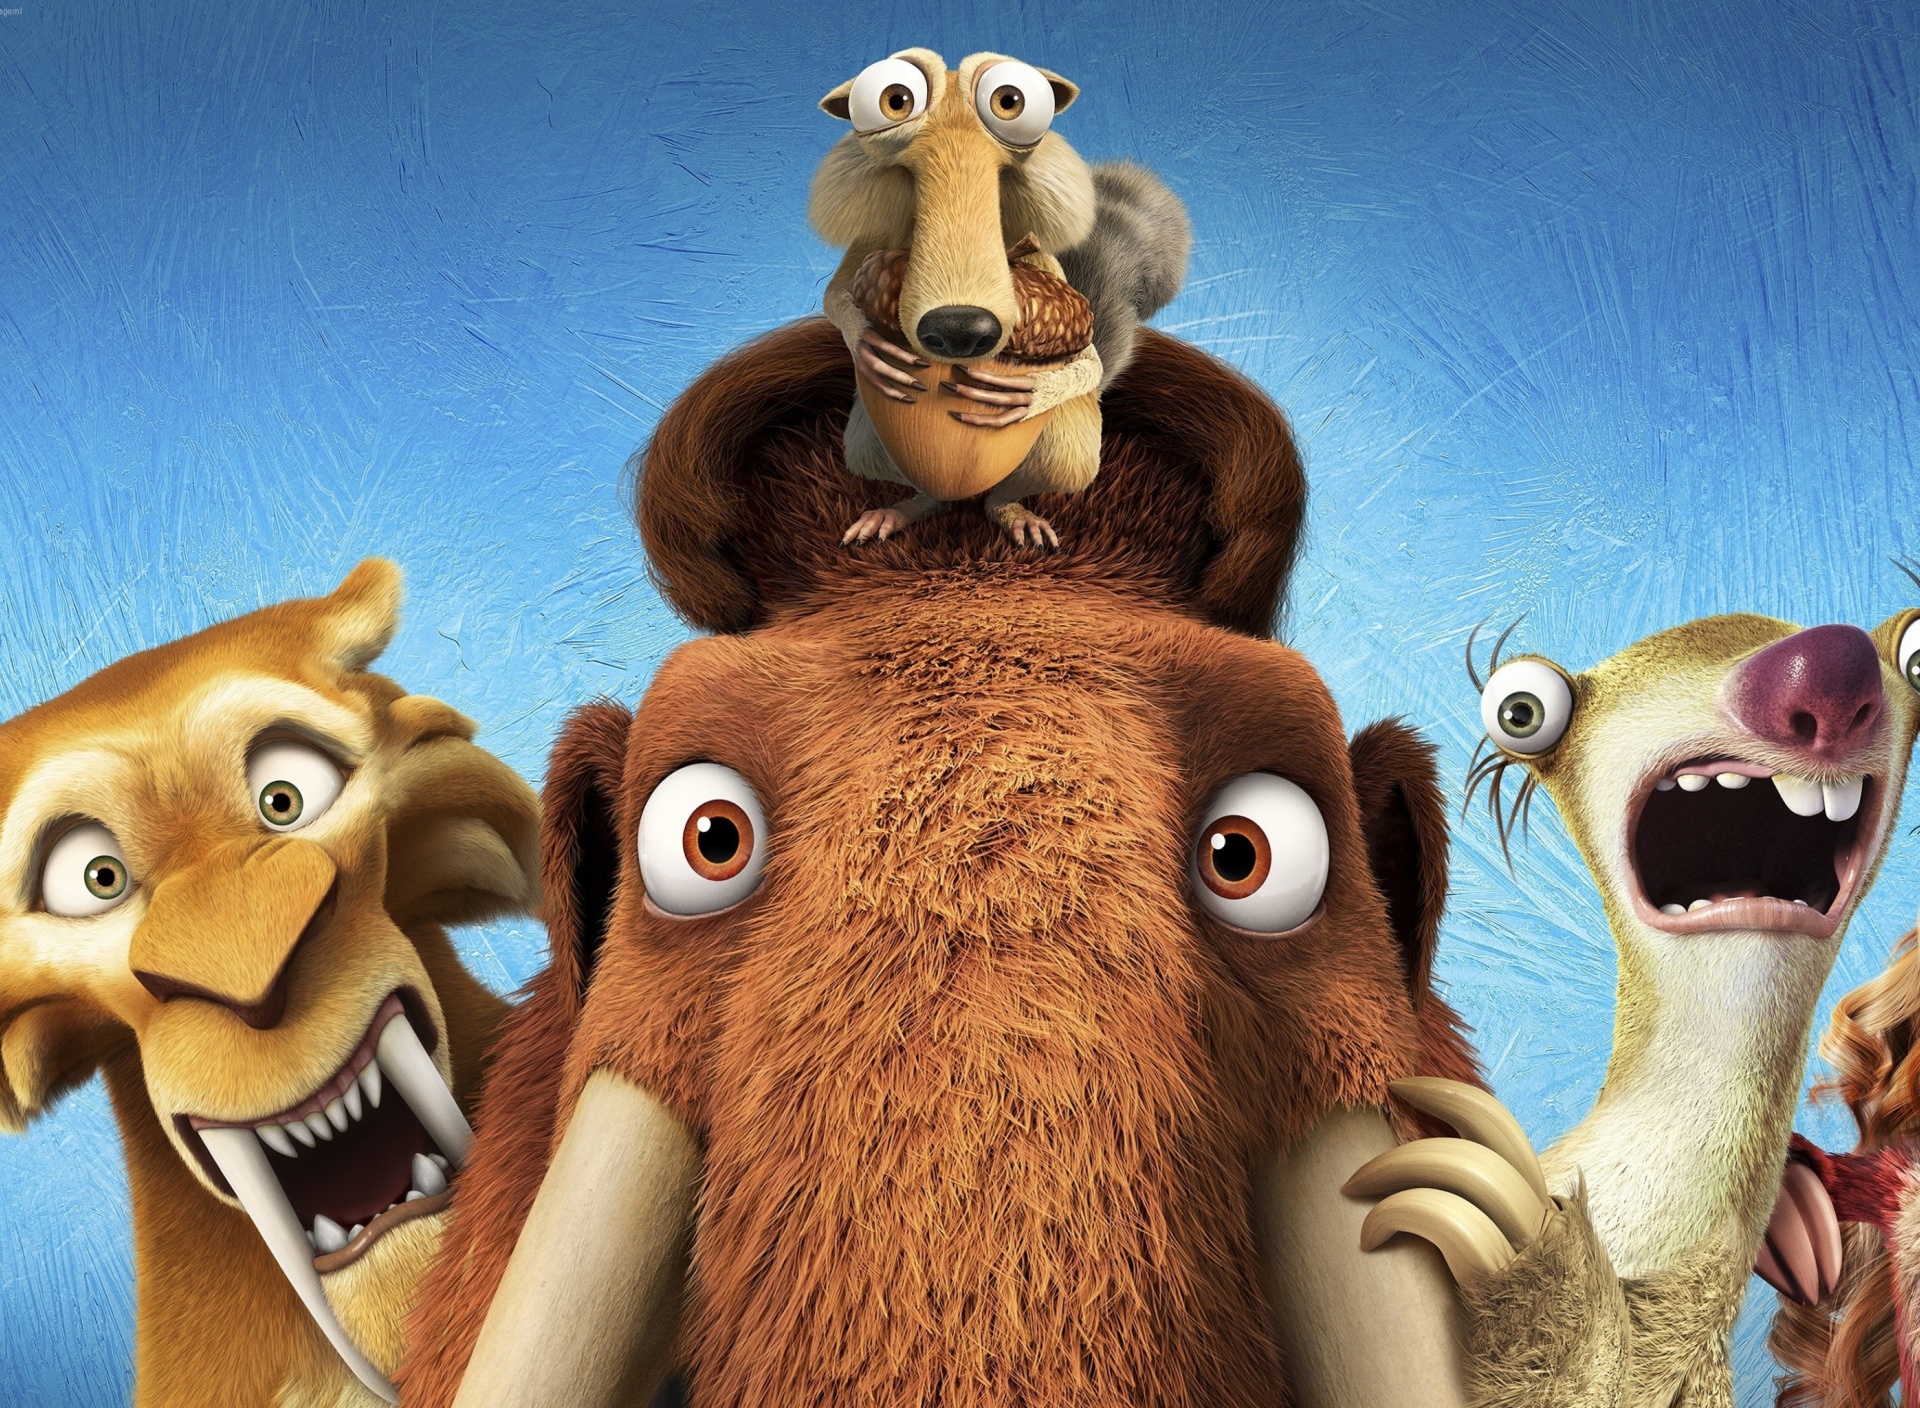 Das Ice Age 5 Collision Course with Diego, Manny, Scrat, Sid, Mammoths Wallpaper 1920x1408